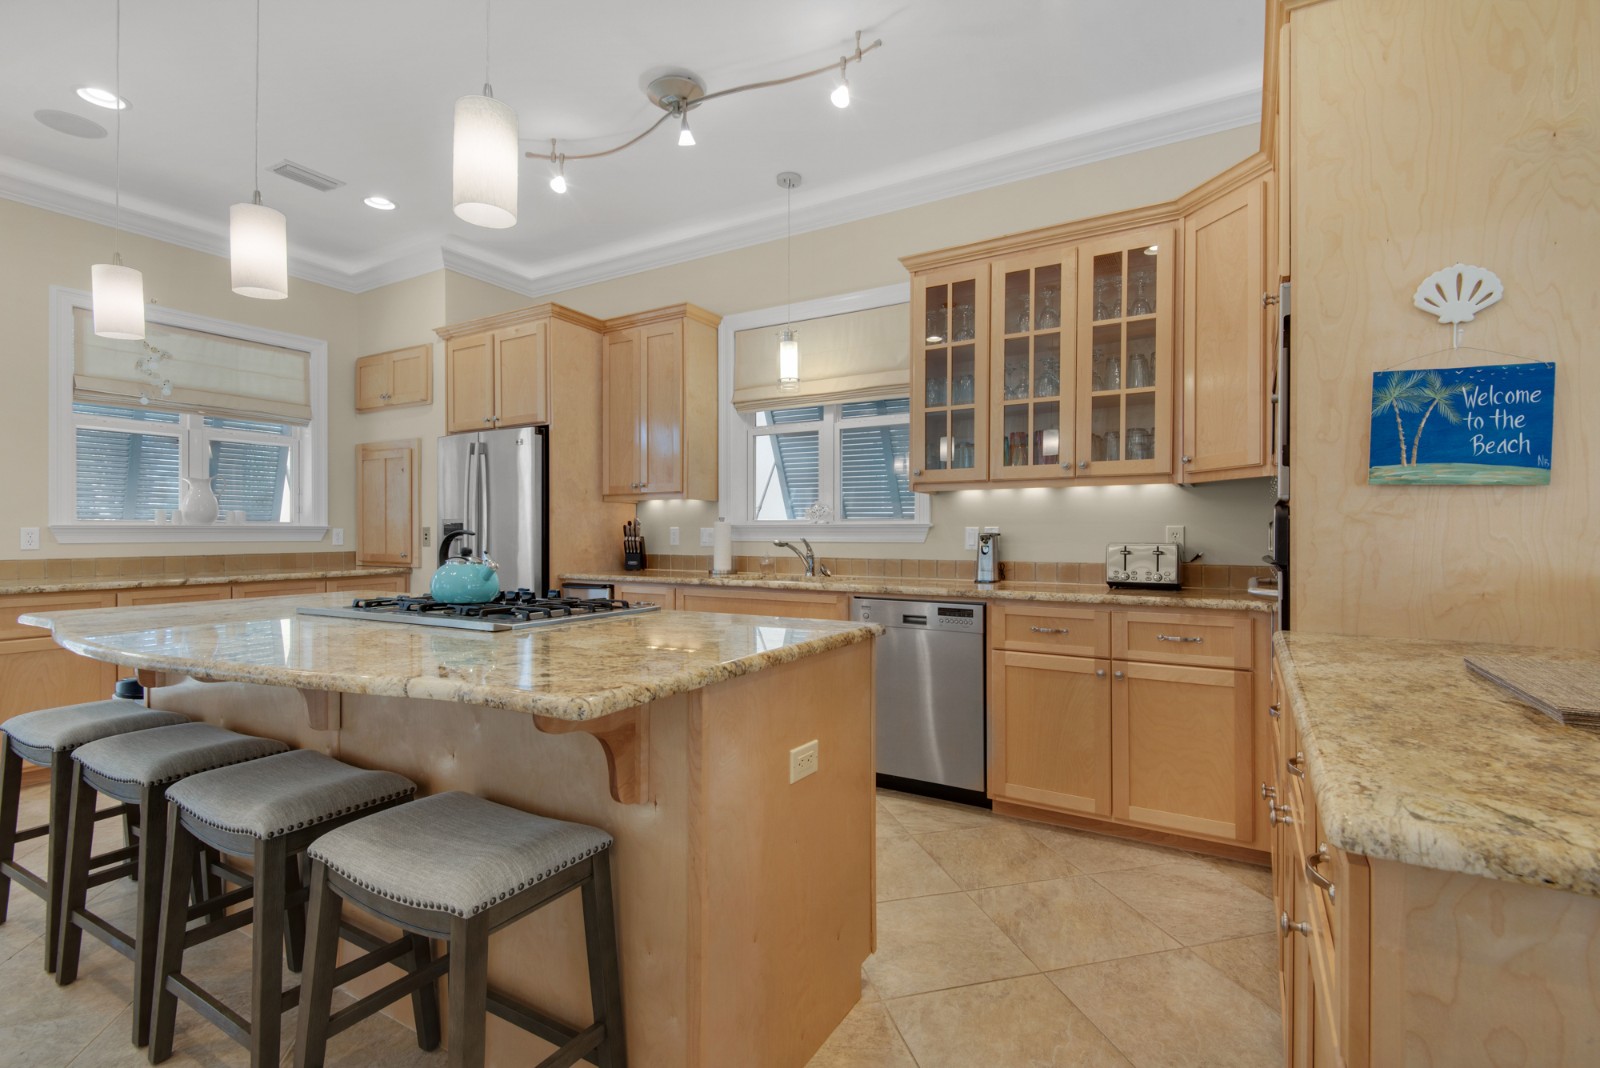 Well appointed kitchen features granite counters and stainless appliances